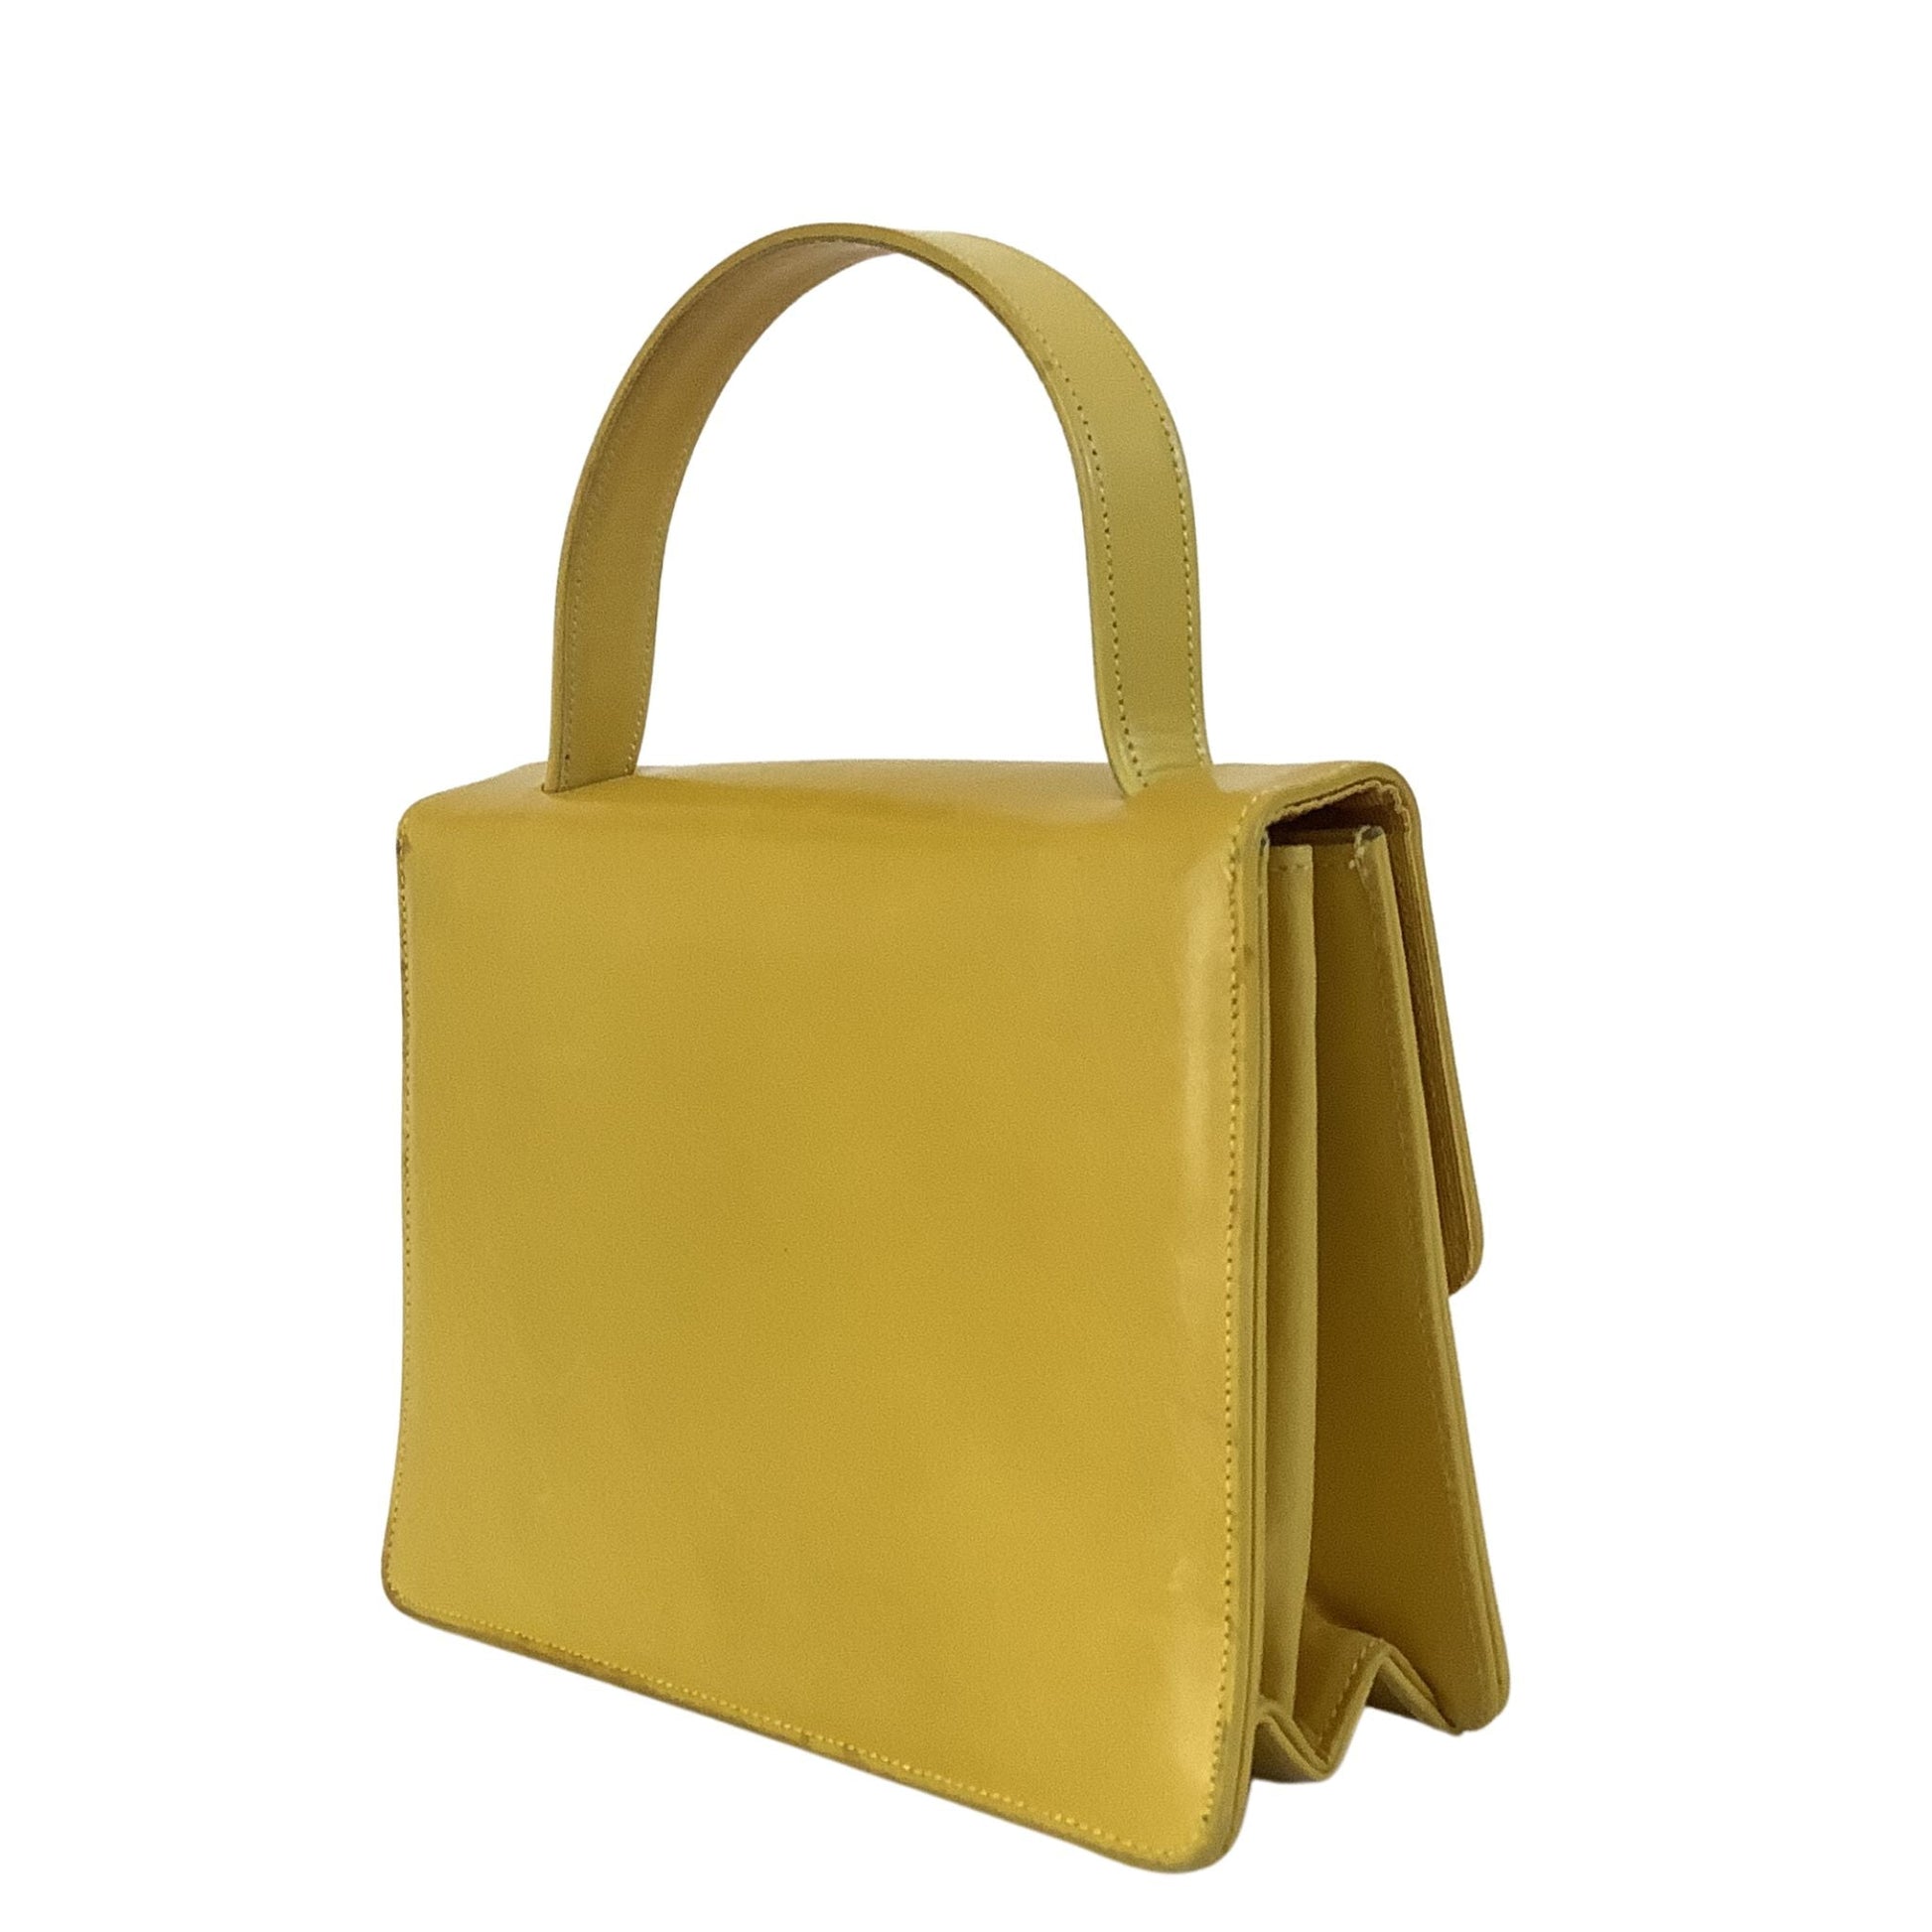 Yellow Leather Purse Yellow / Leather / Vintage 1960s